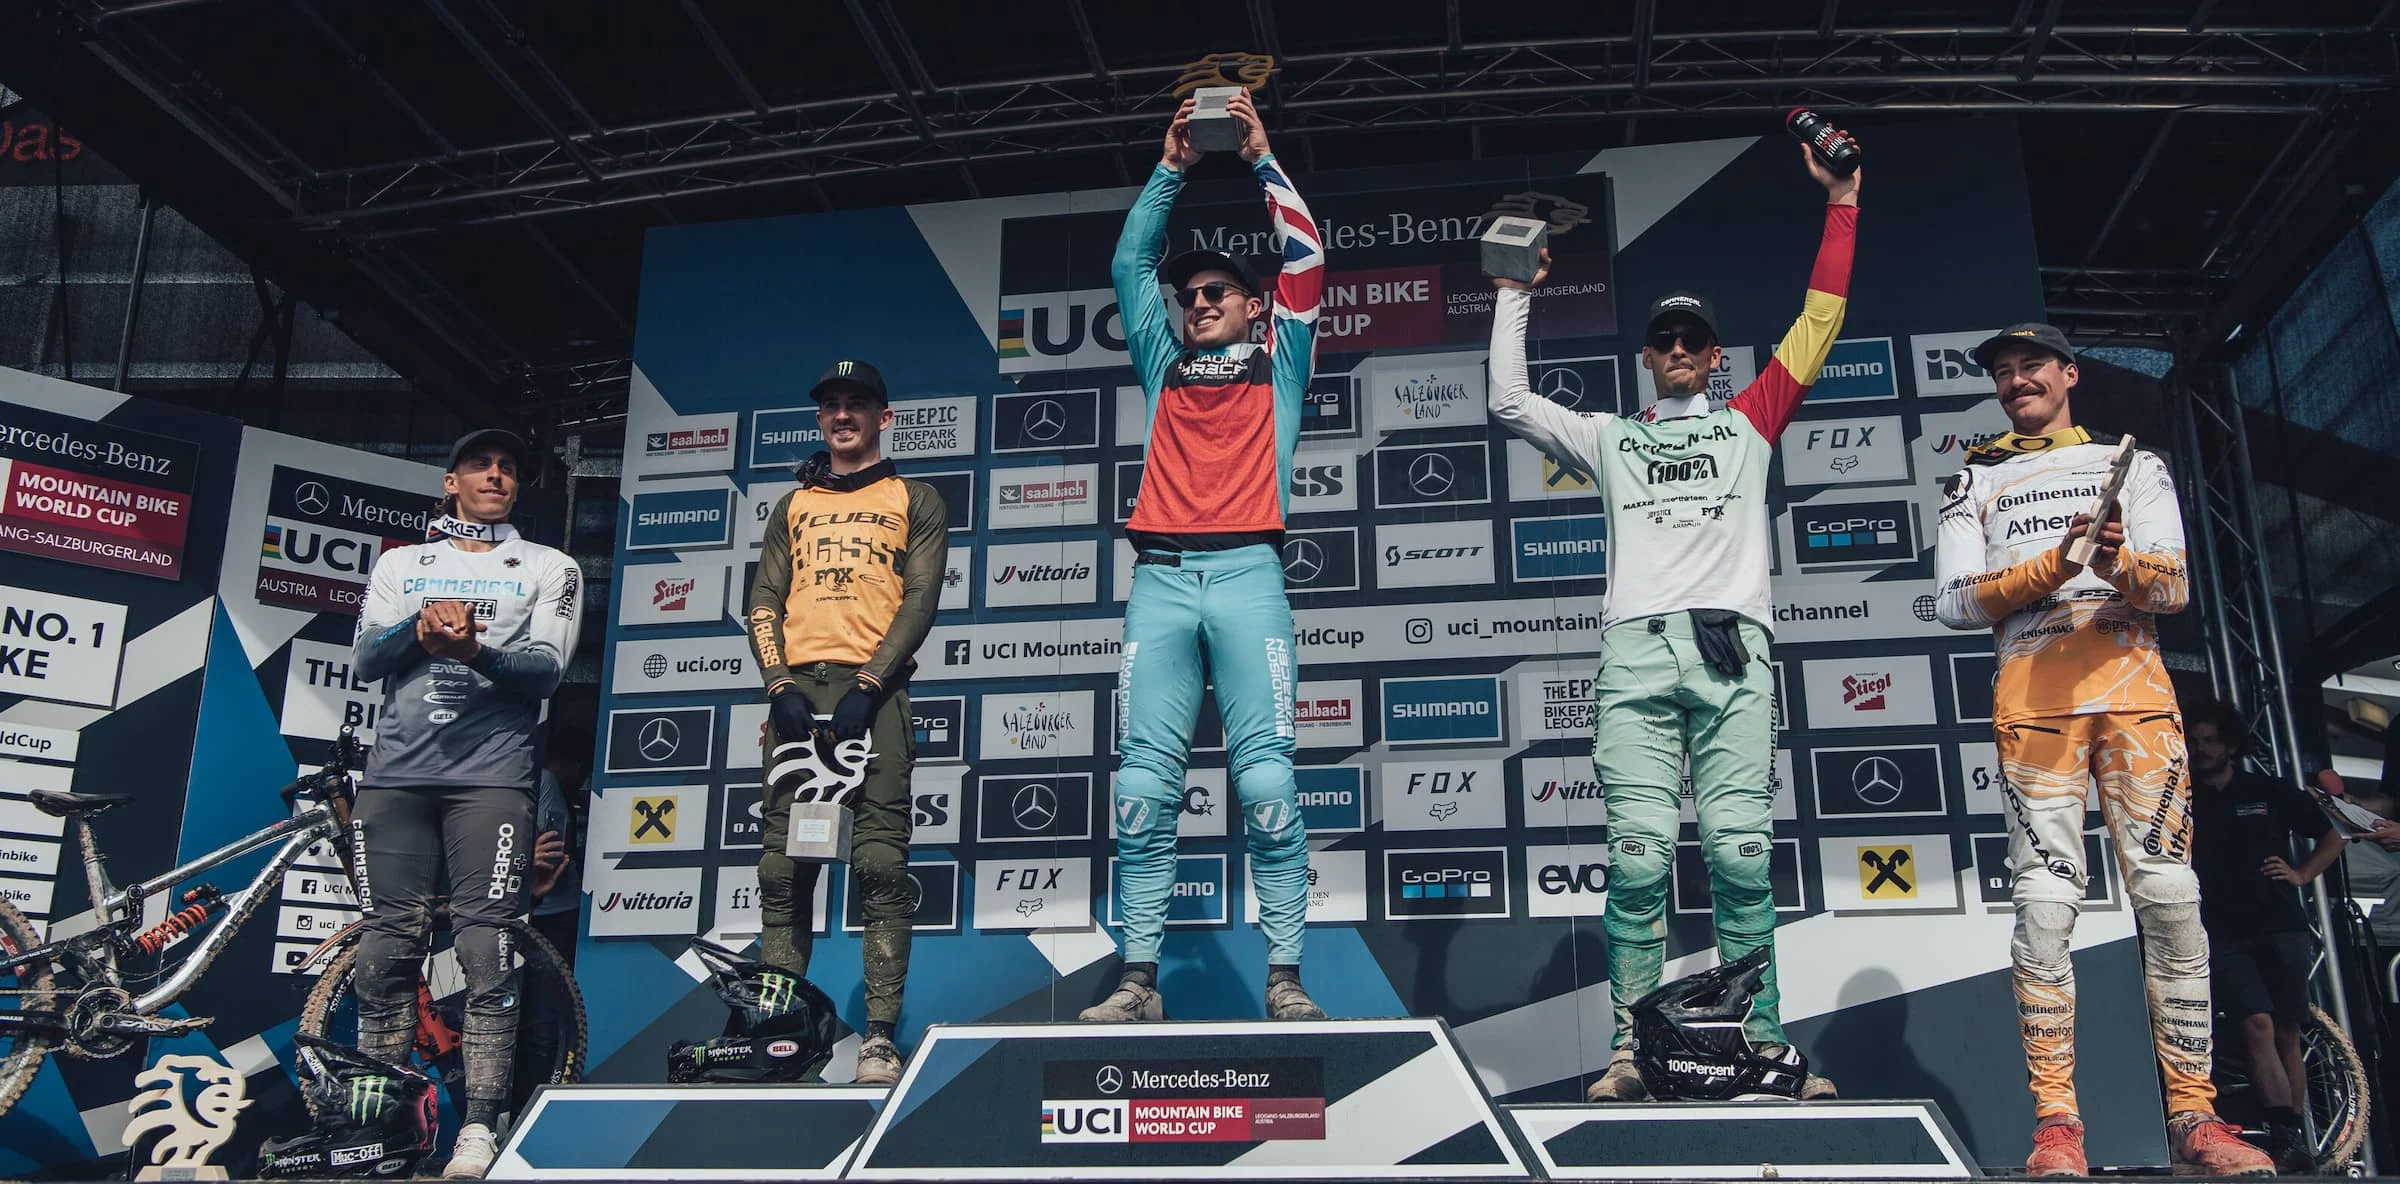 Competitors at the uci mtb world cup 2022